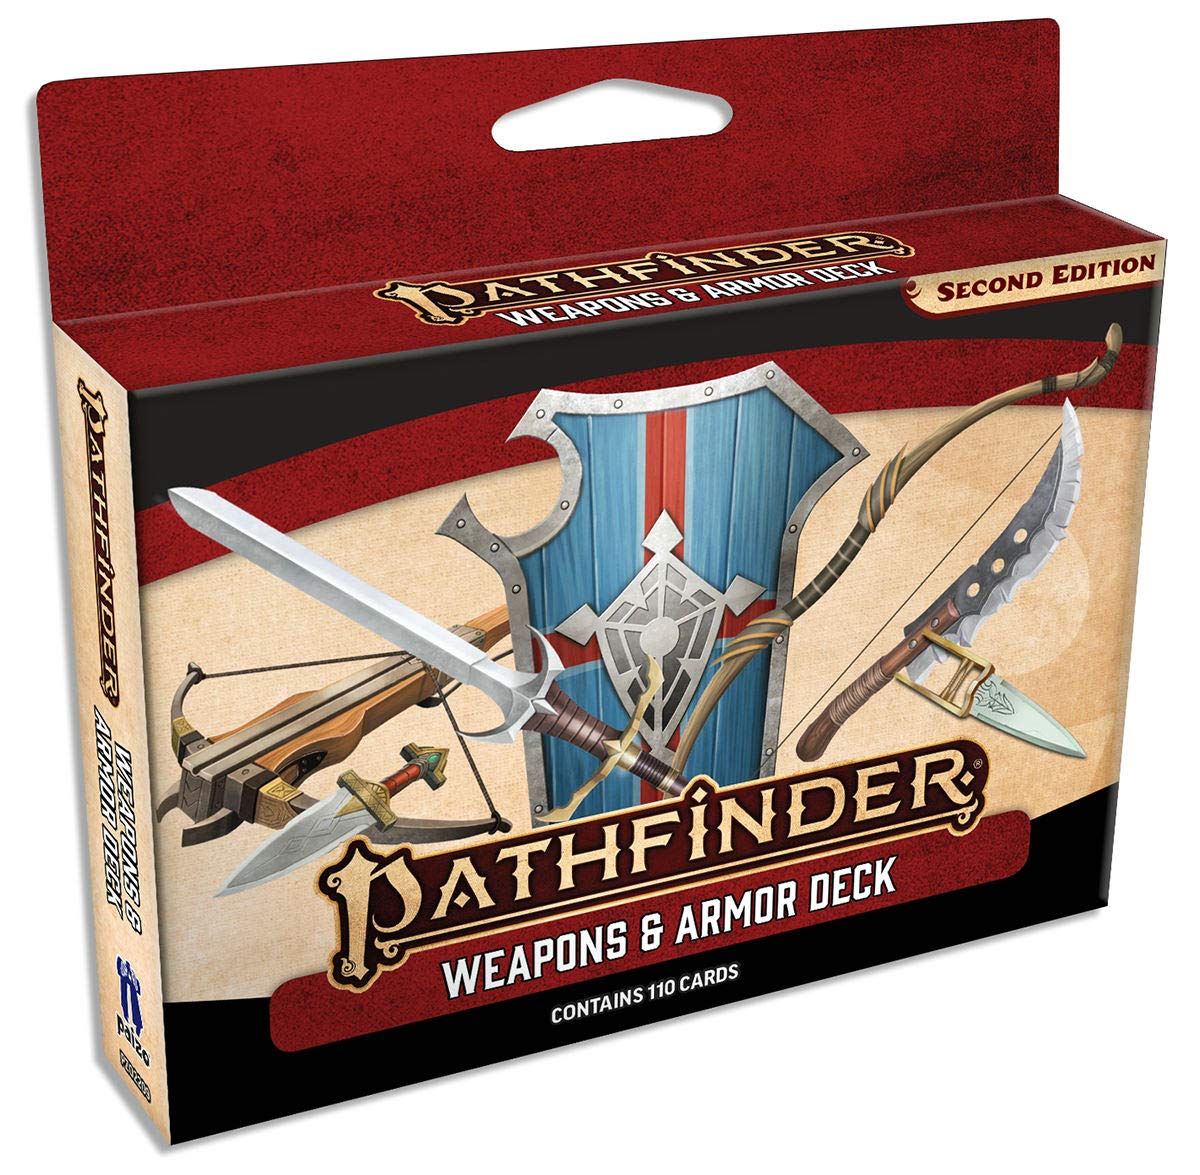 Pathfinder Weapons & Armor Deck 2e